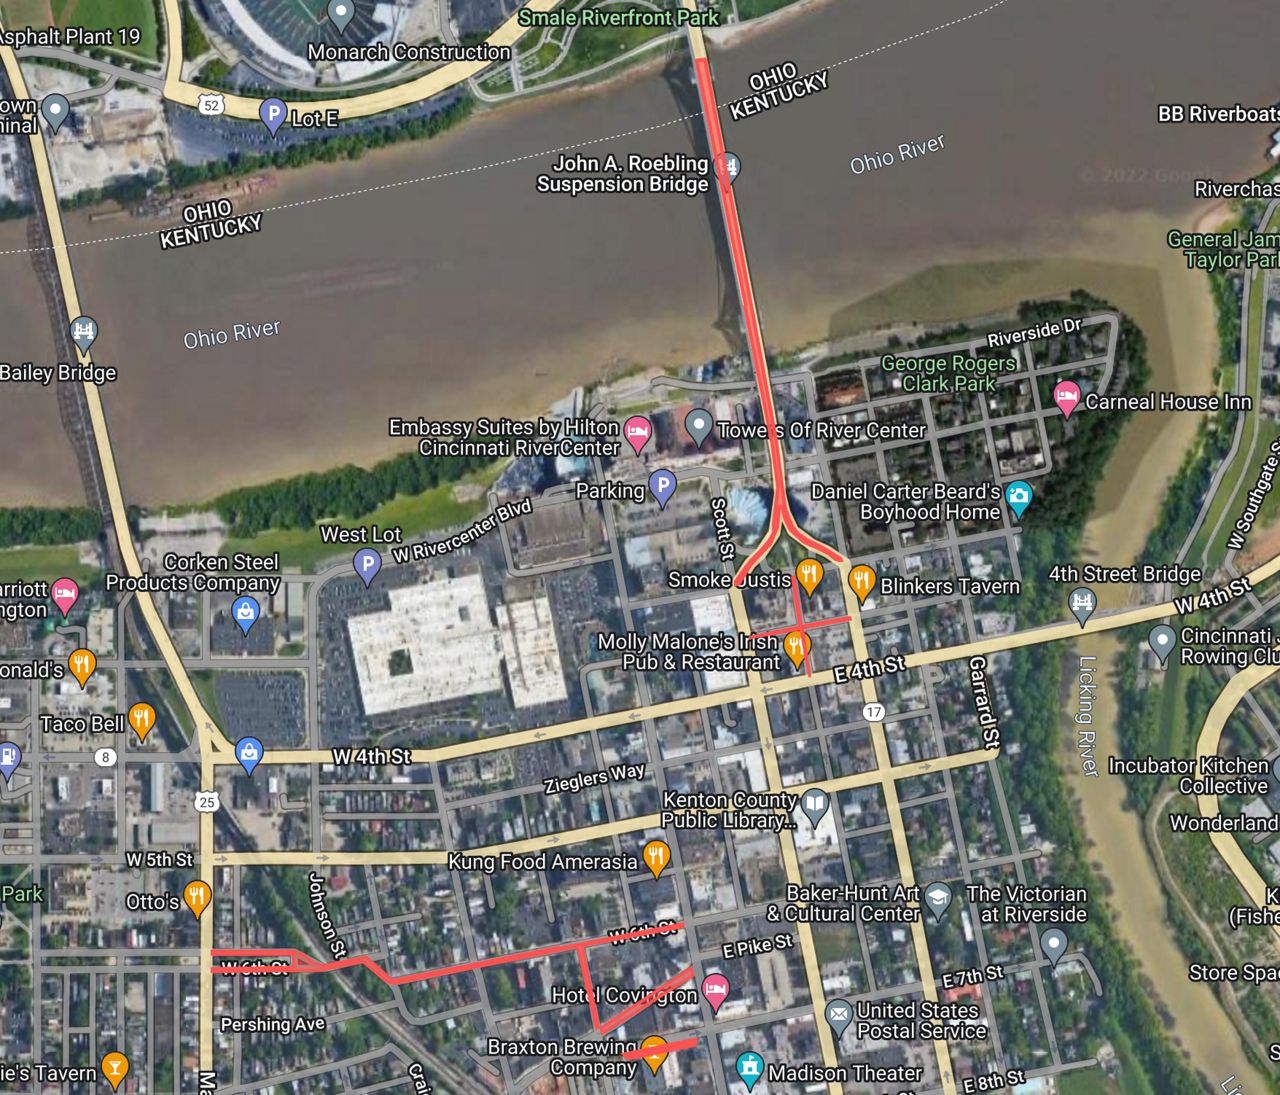 A map of road closures and traffic restrictions in Covington during BLINK. (Image courtesy of City of Covington)